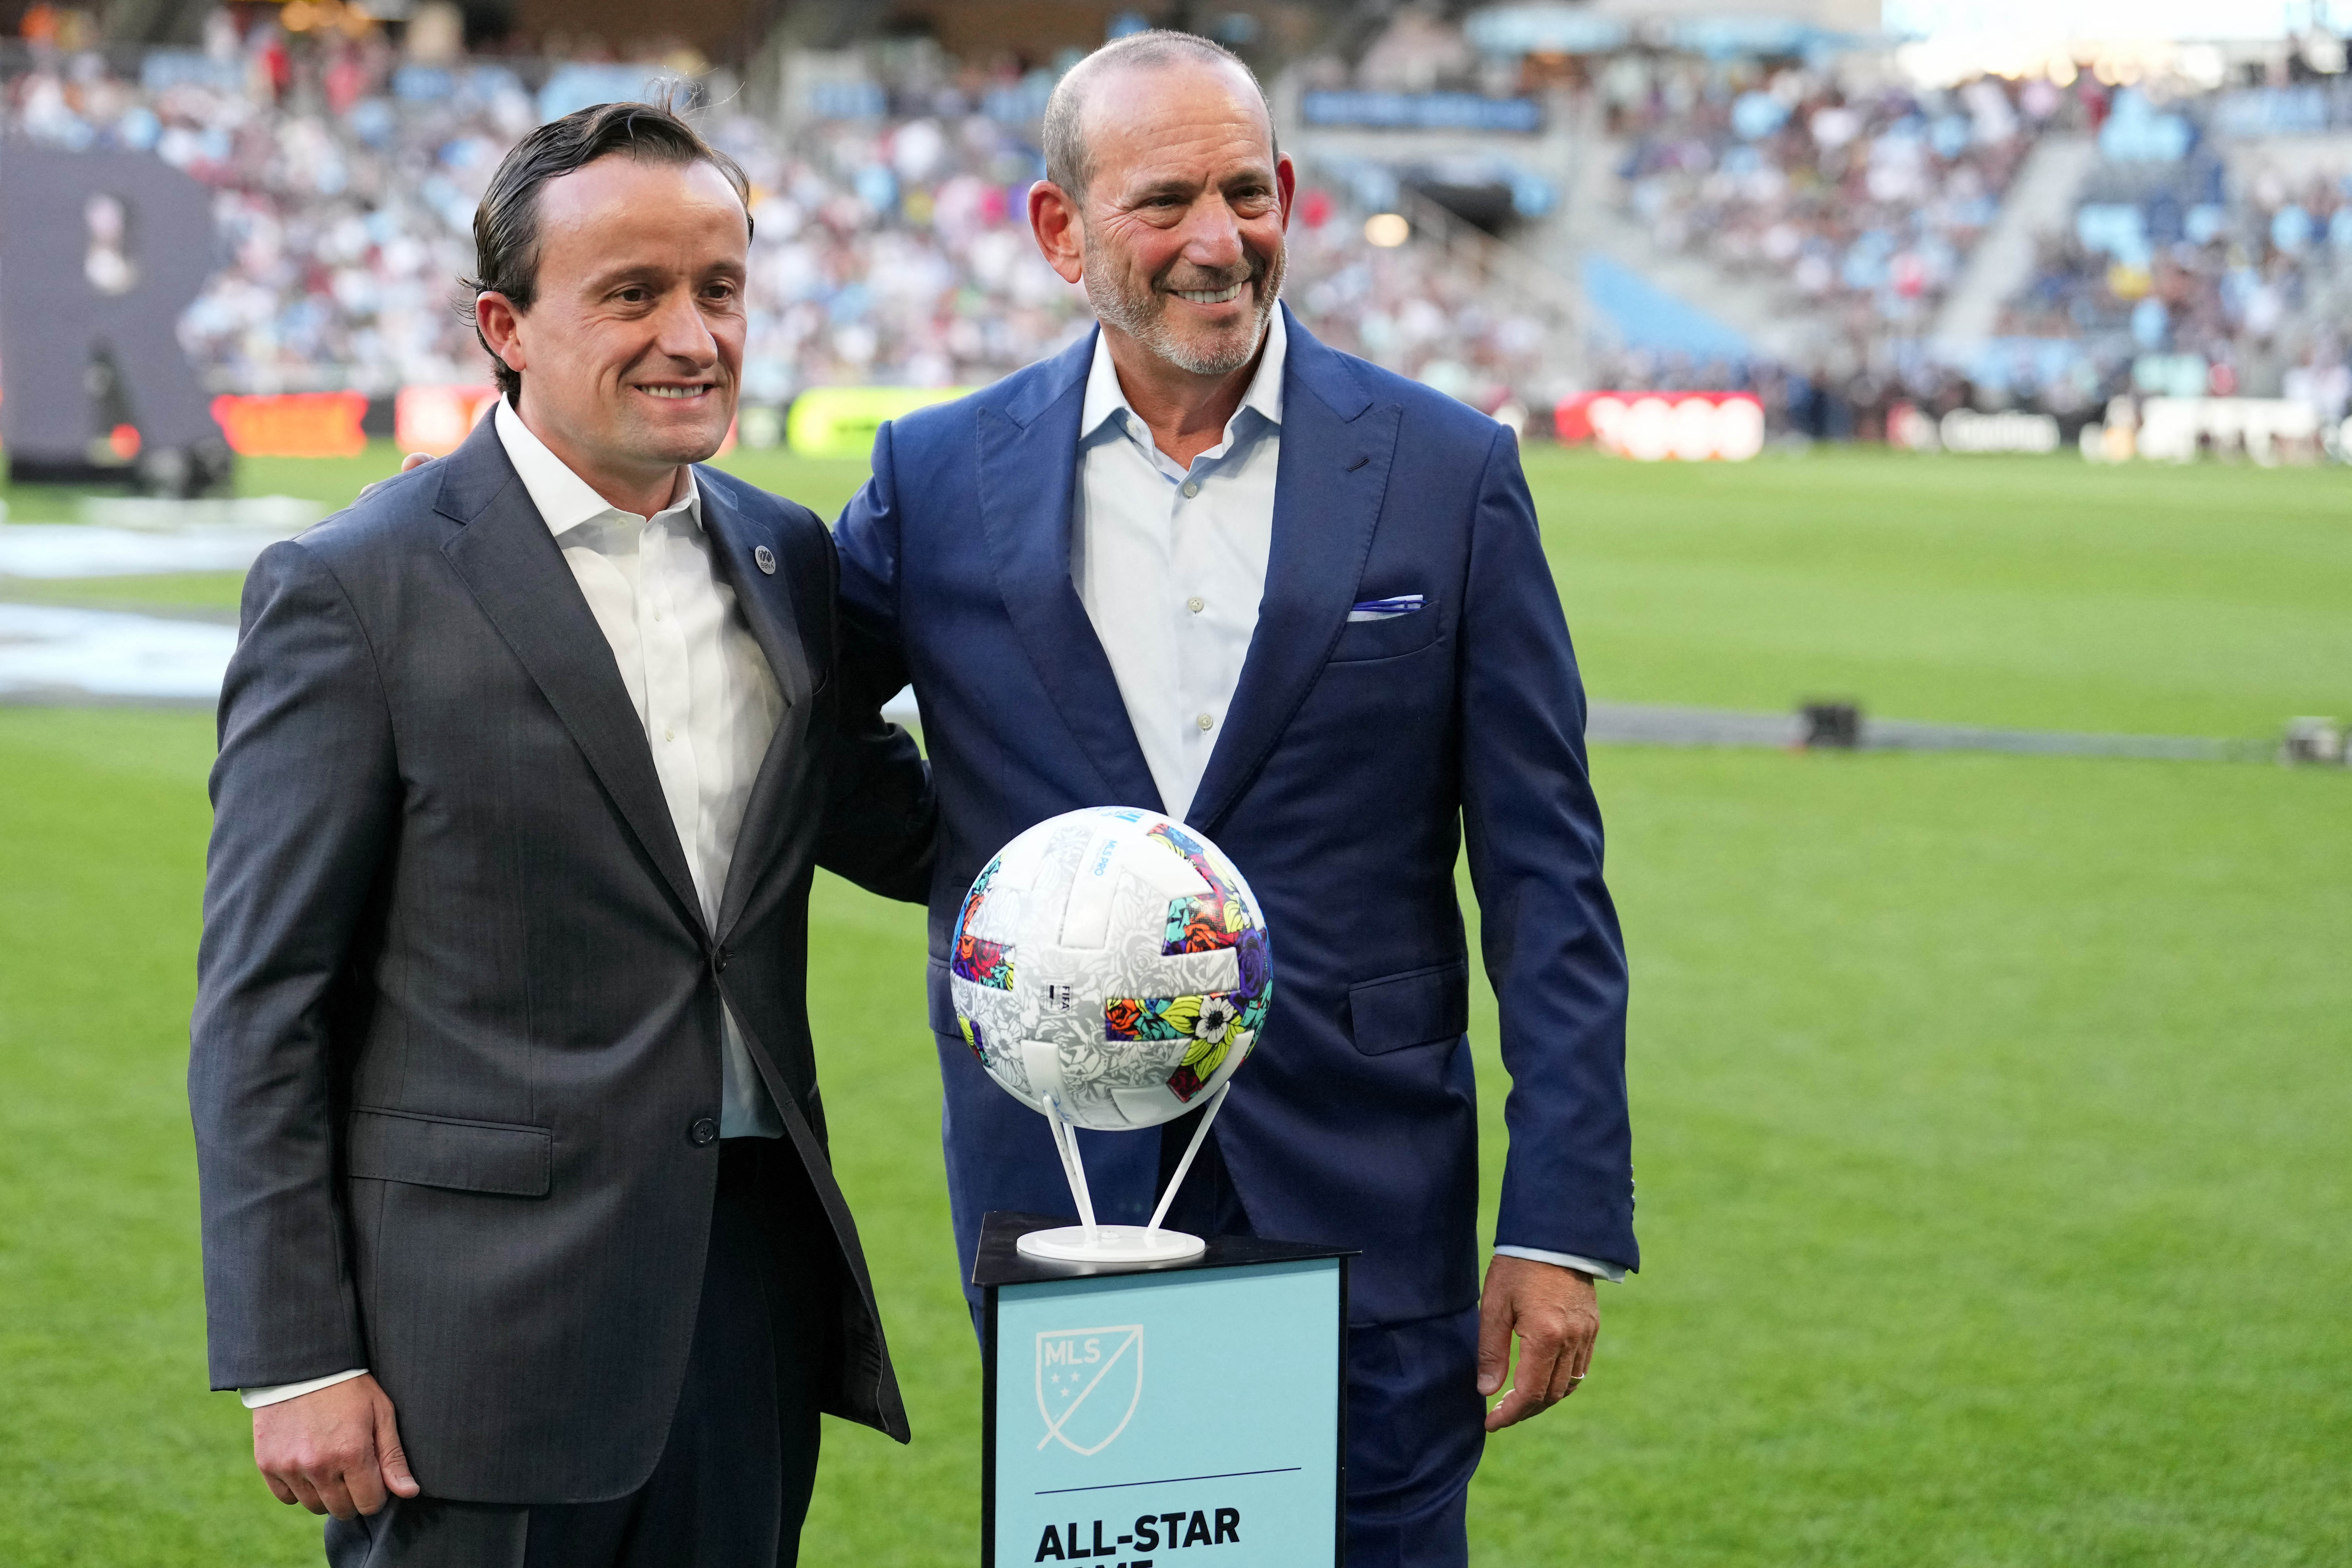 August 10, 2022;  St. Paul, Minnesota, USA;  Liga MX President Mikel Areola (left) and MLS Commissioner Don Garber (right) pose for a photo before the 2022 MLS All-Star Game at Allianz Stadium.  Mandatory credit: Brace Hemmelgarn-USA TODAY Sports